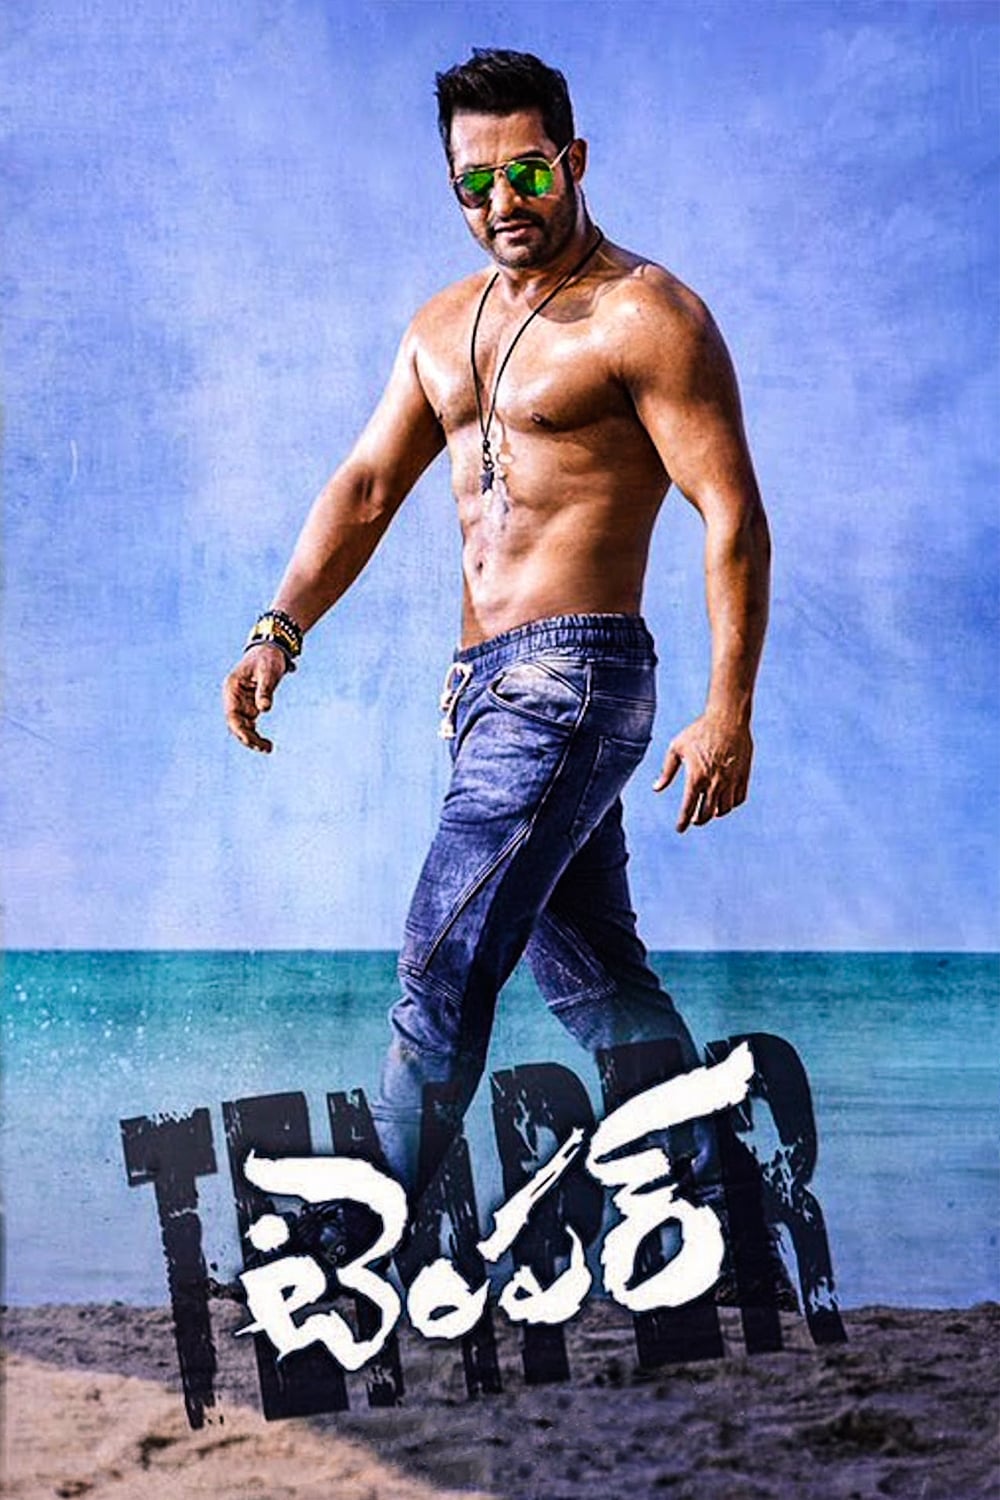 Poster for the movie "Temper"